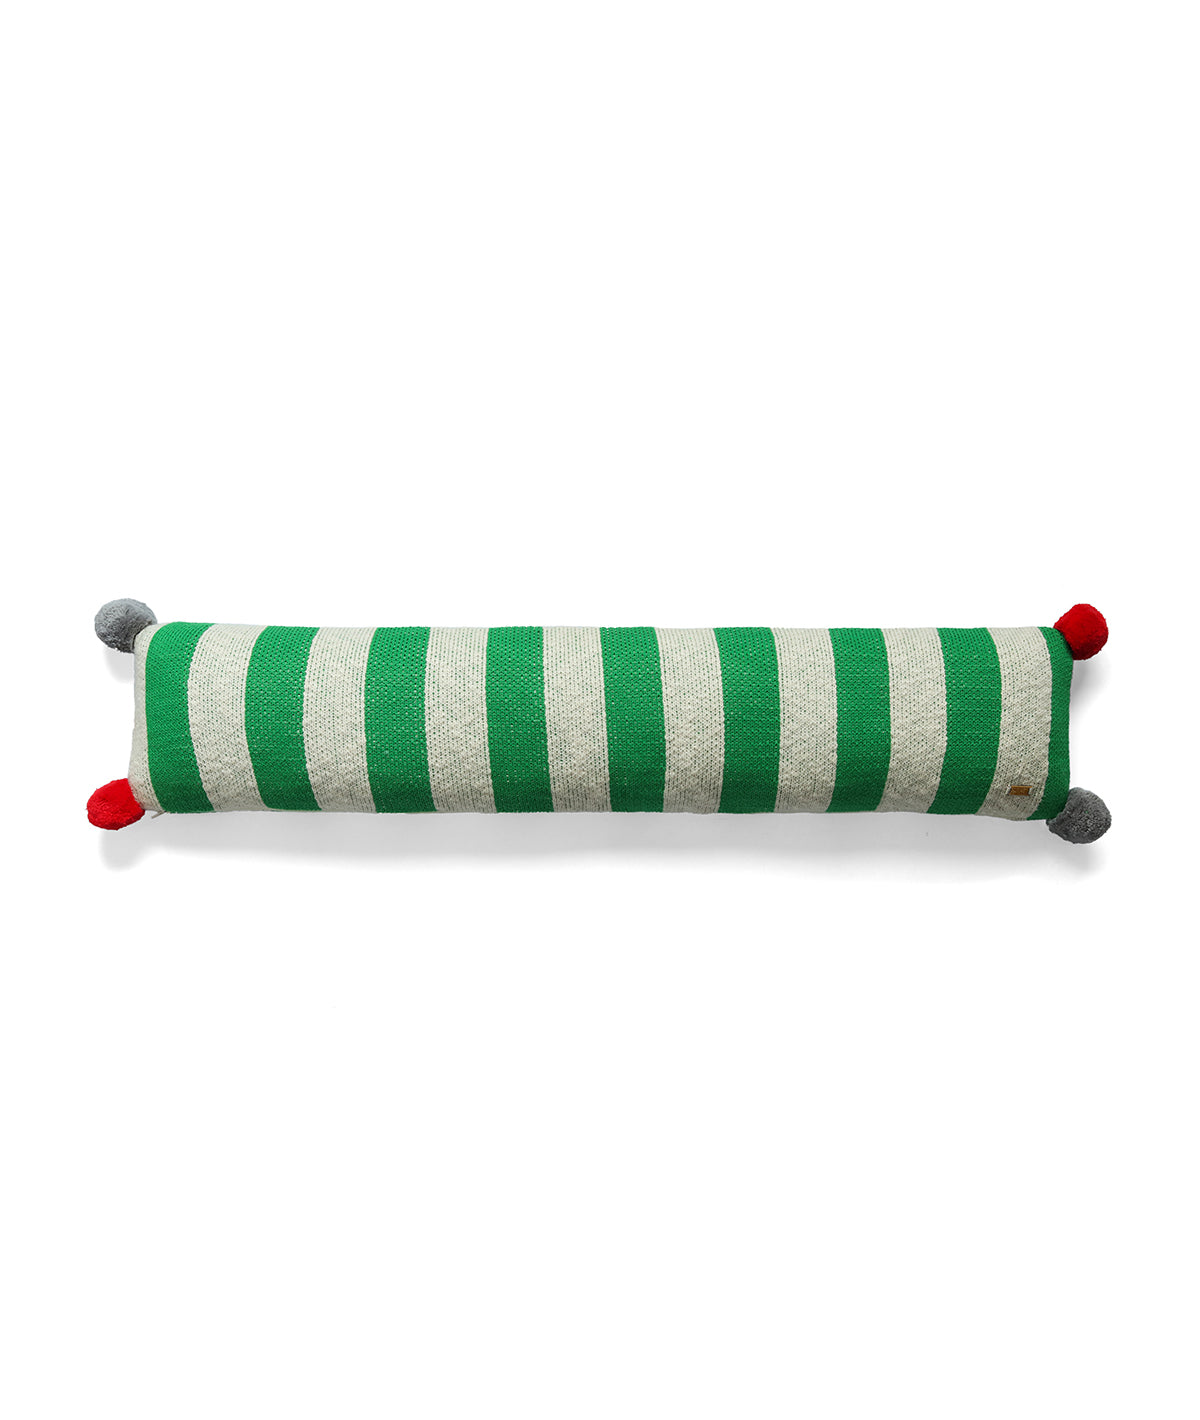 Streaky Cotton Knitted Decorative Hot Green & Natural Color with Red Pom Poms 35 x 7 Inches Oblong Pillow Cover